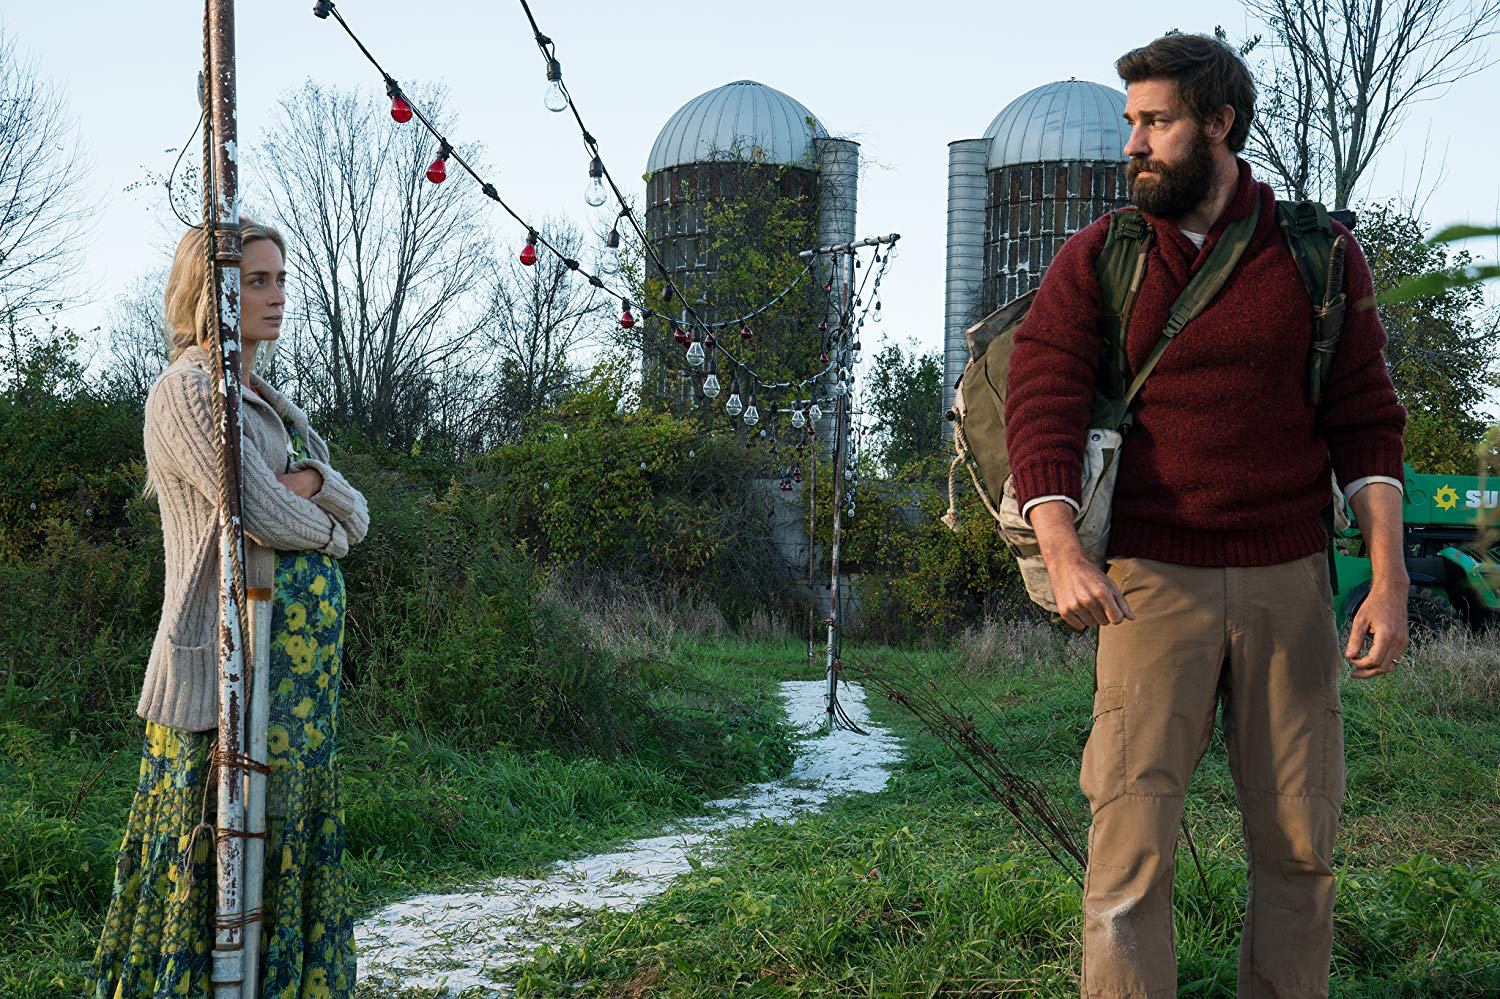 Emily Blunt and John Krasinski in the Paramount Pictures release A Quiet Place